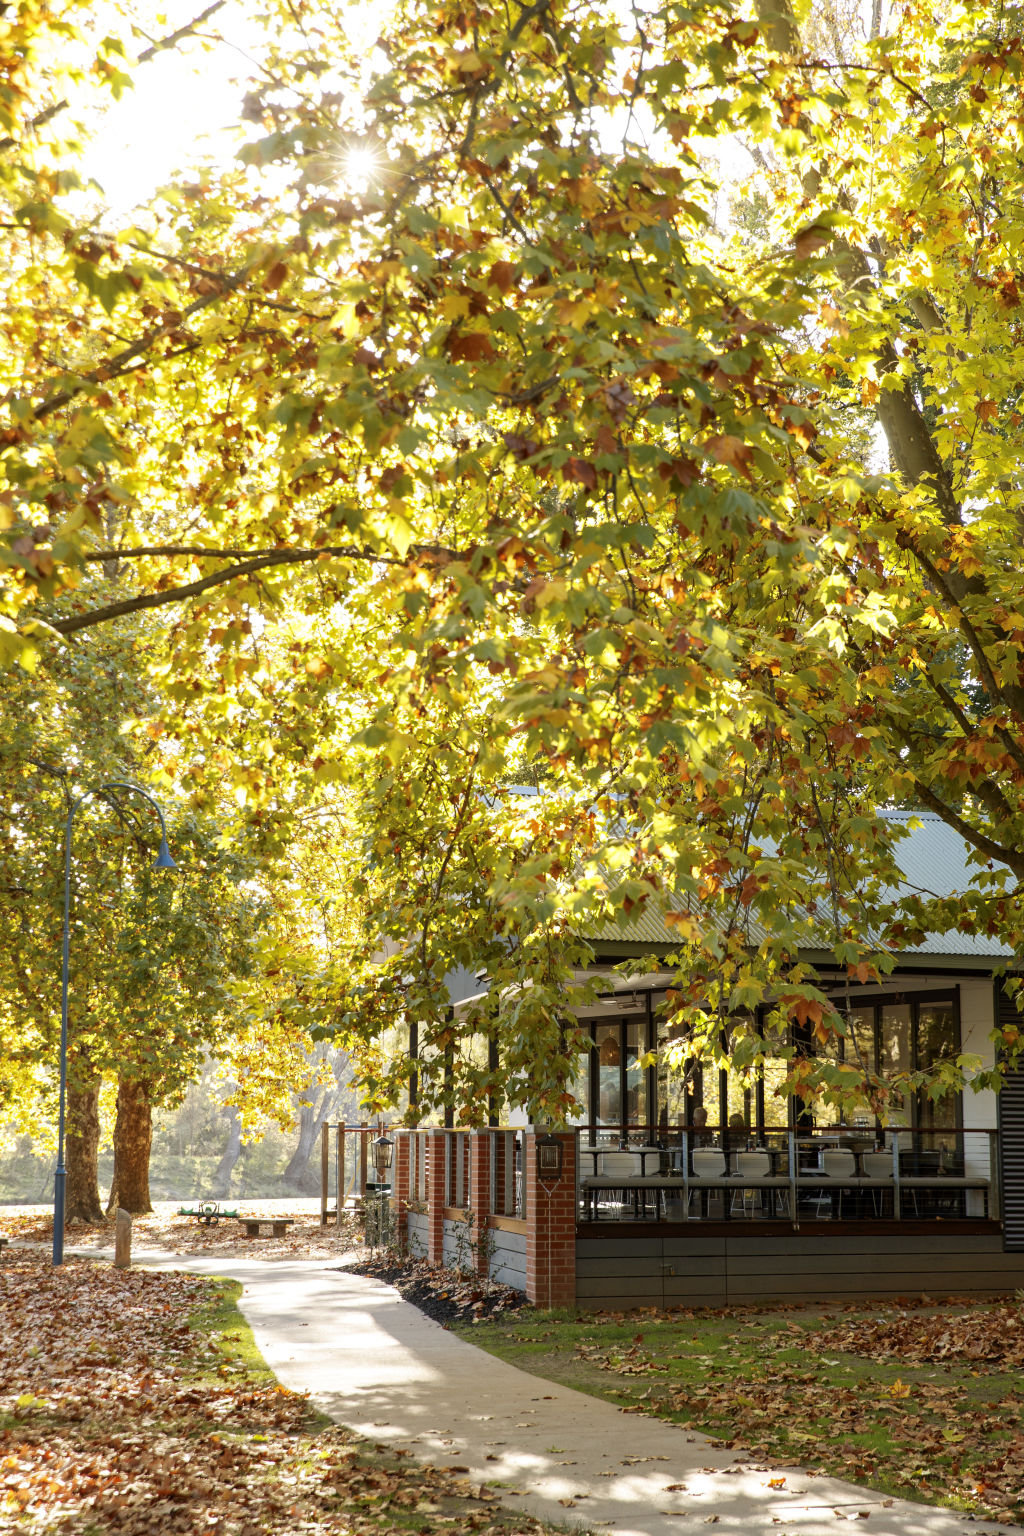 Its bustling restaurant and cafe culture have only added to Albury's appeal. Photo: James Horan